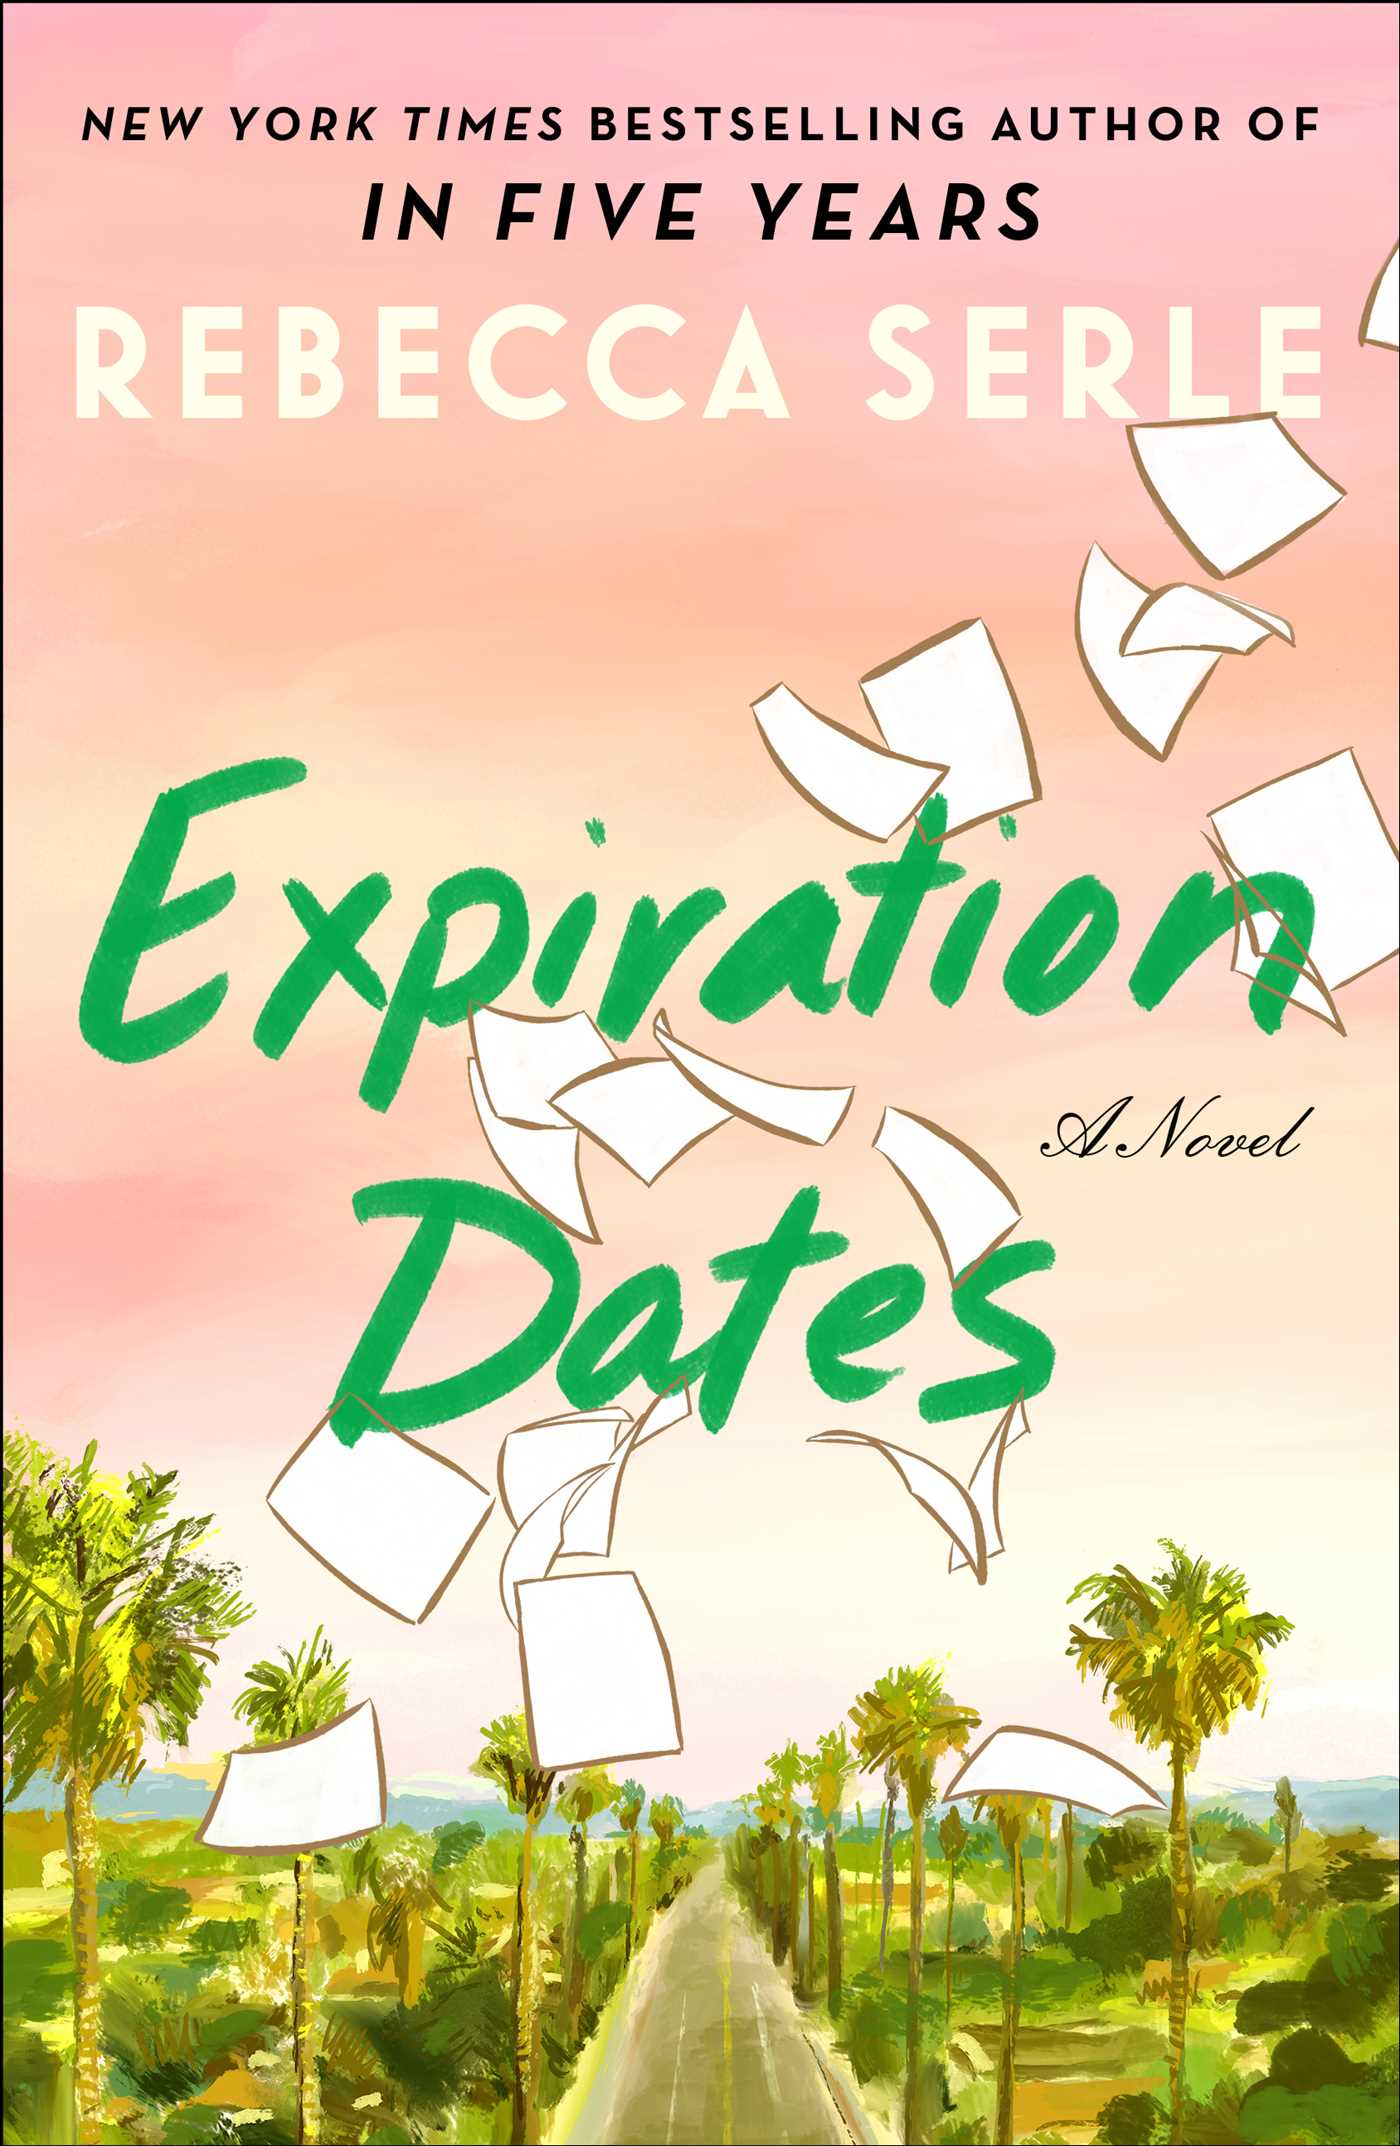 Chapter 1: Expiration Dates by Rebecca Serle